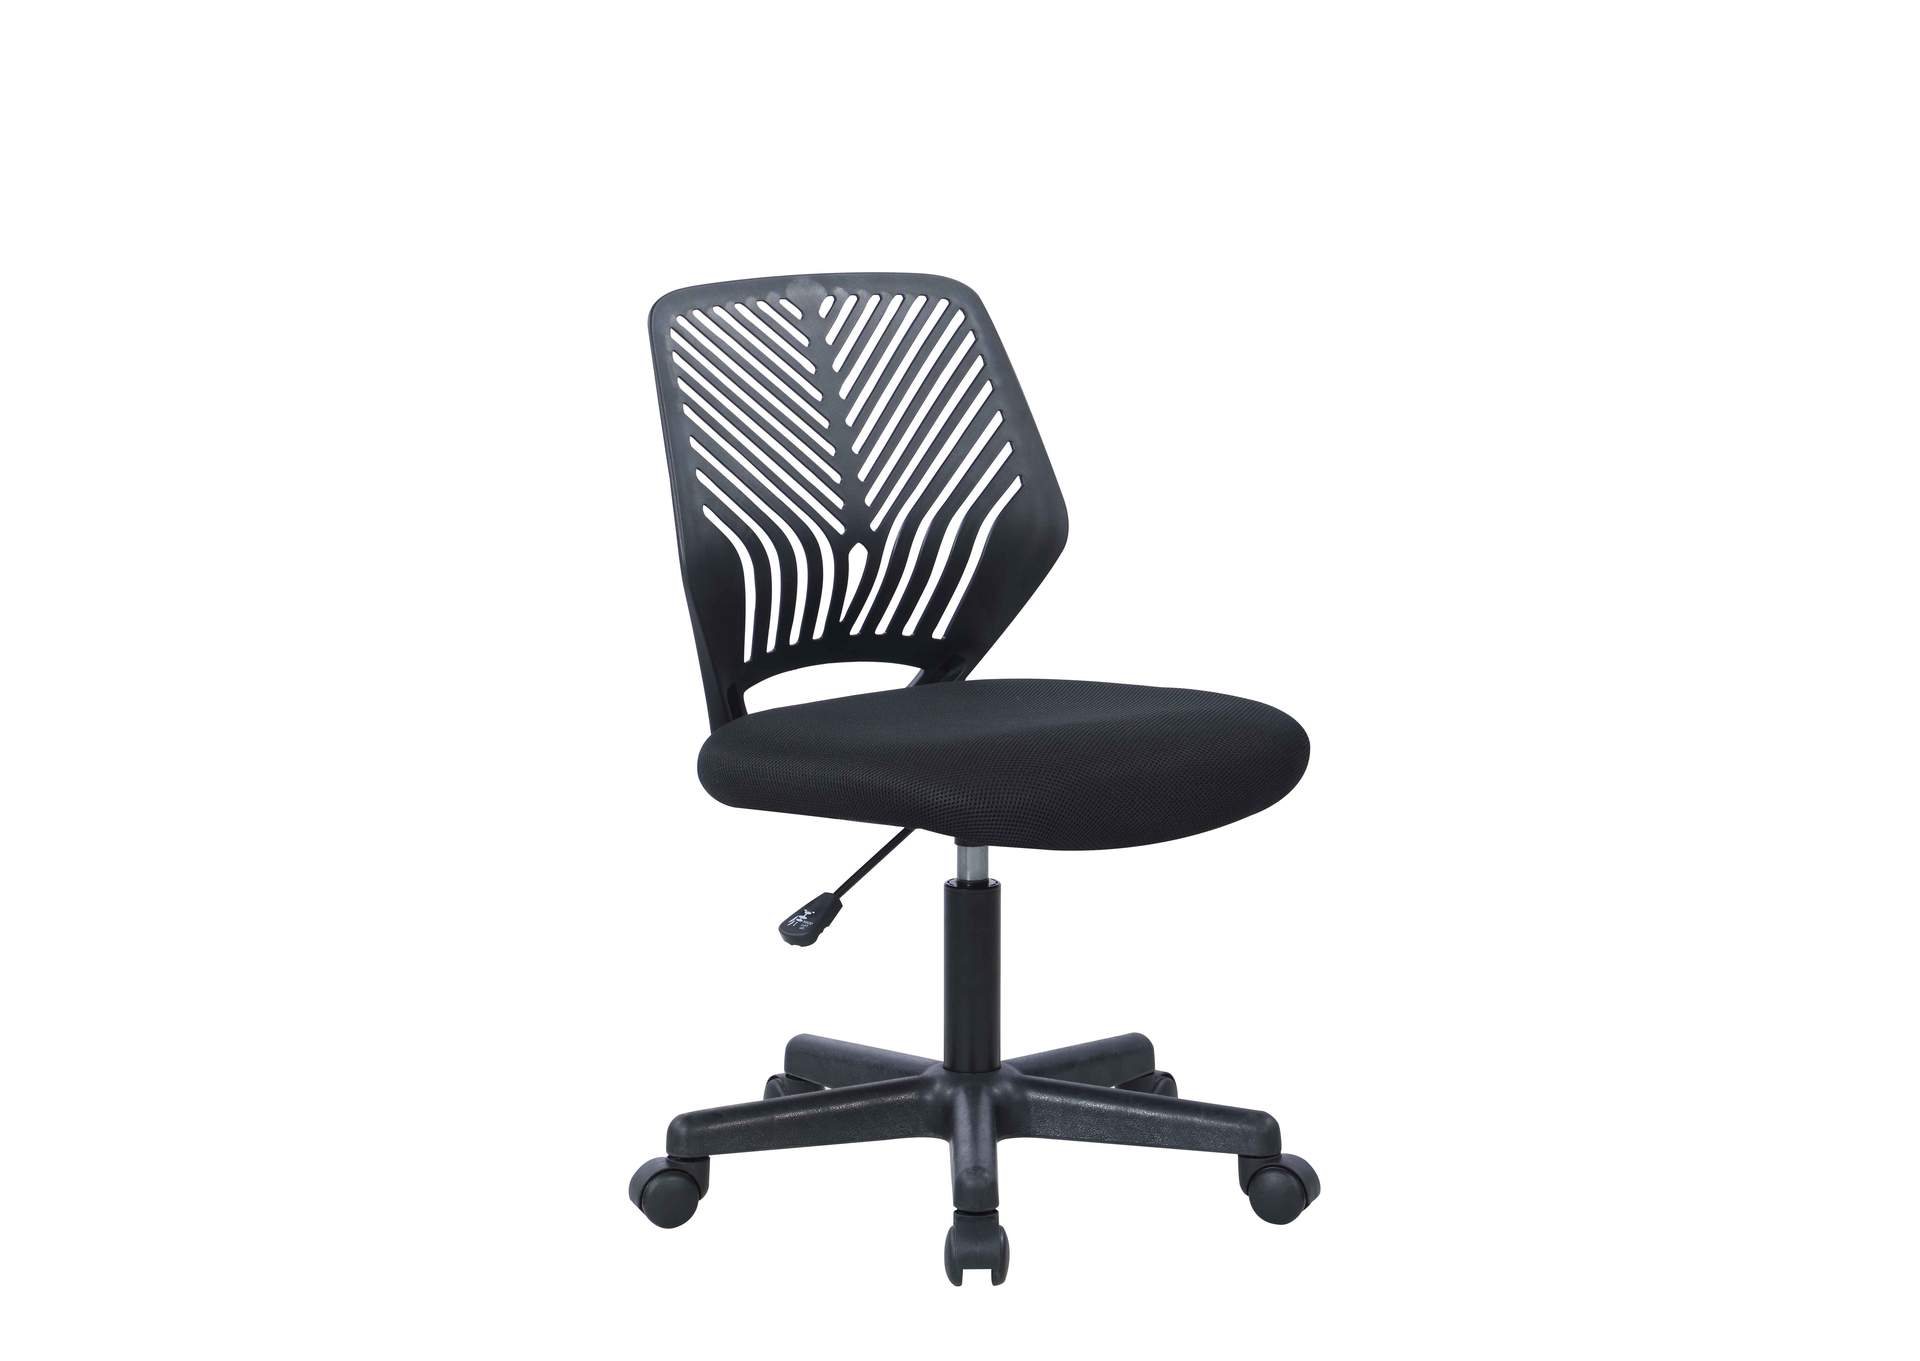 Modern Pneumatic Adjustable-Height Computer Chair,Chintaly Imports